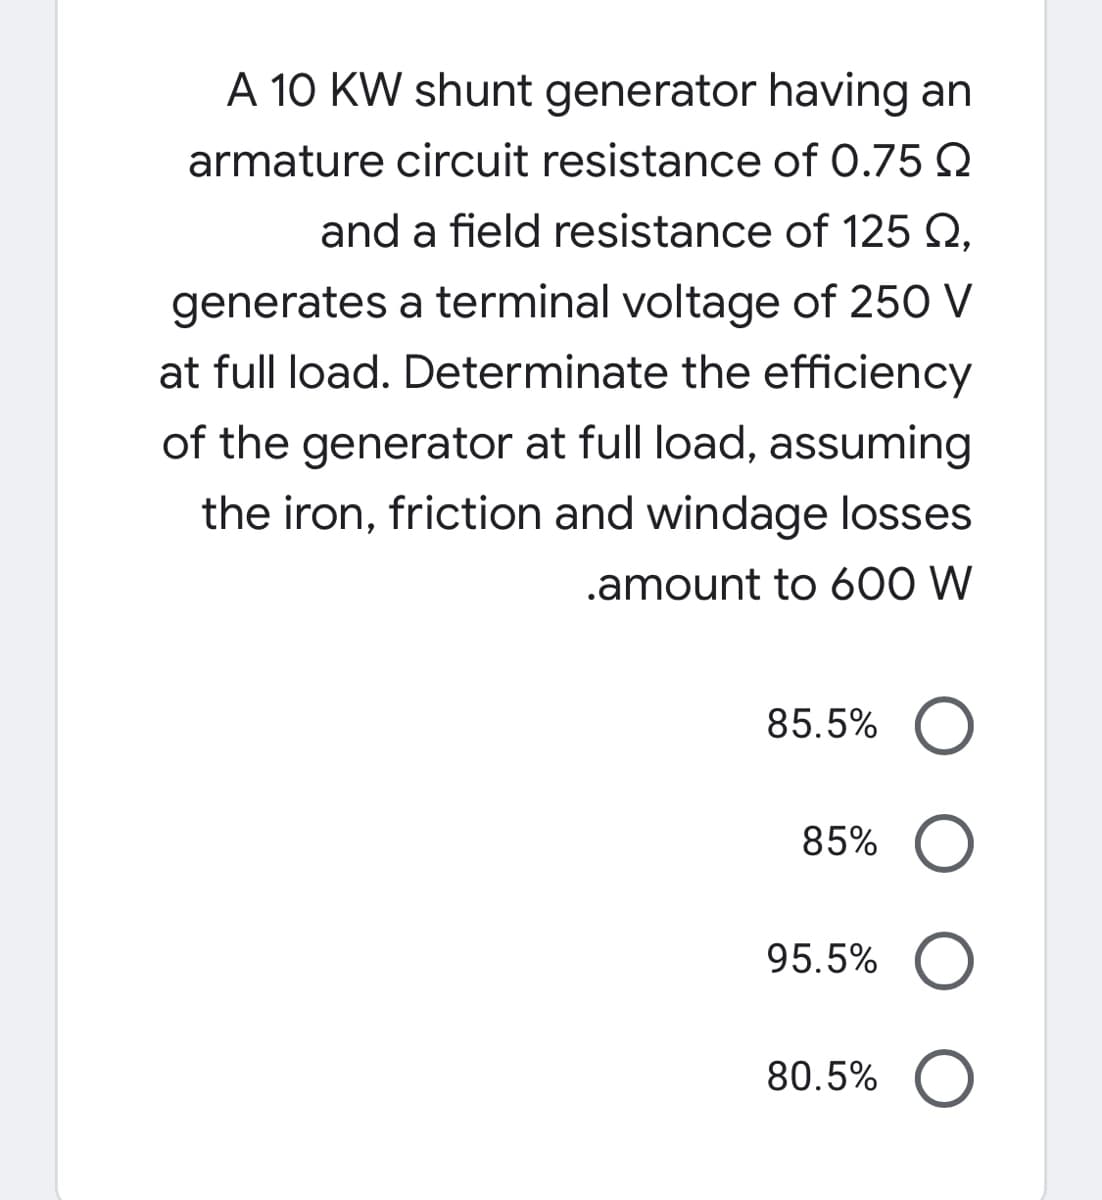 A 10 KW shunt generator having an
armature circuit resistance of 0.75 Q
and a field resistance of 125 Q,
generates a terminal voltage of 250 V
at full load. Determinate the efficiency
of the generator at full load, assuming
the iron, friction and windage losses
.amount to 600 W
85.5%
85%
95.5%
80.5%
